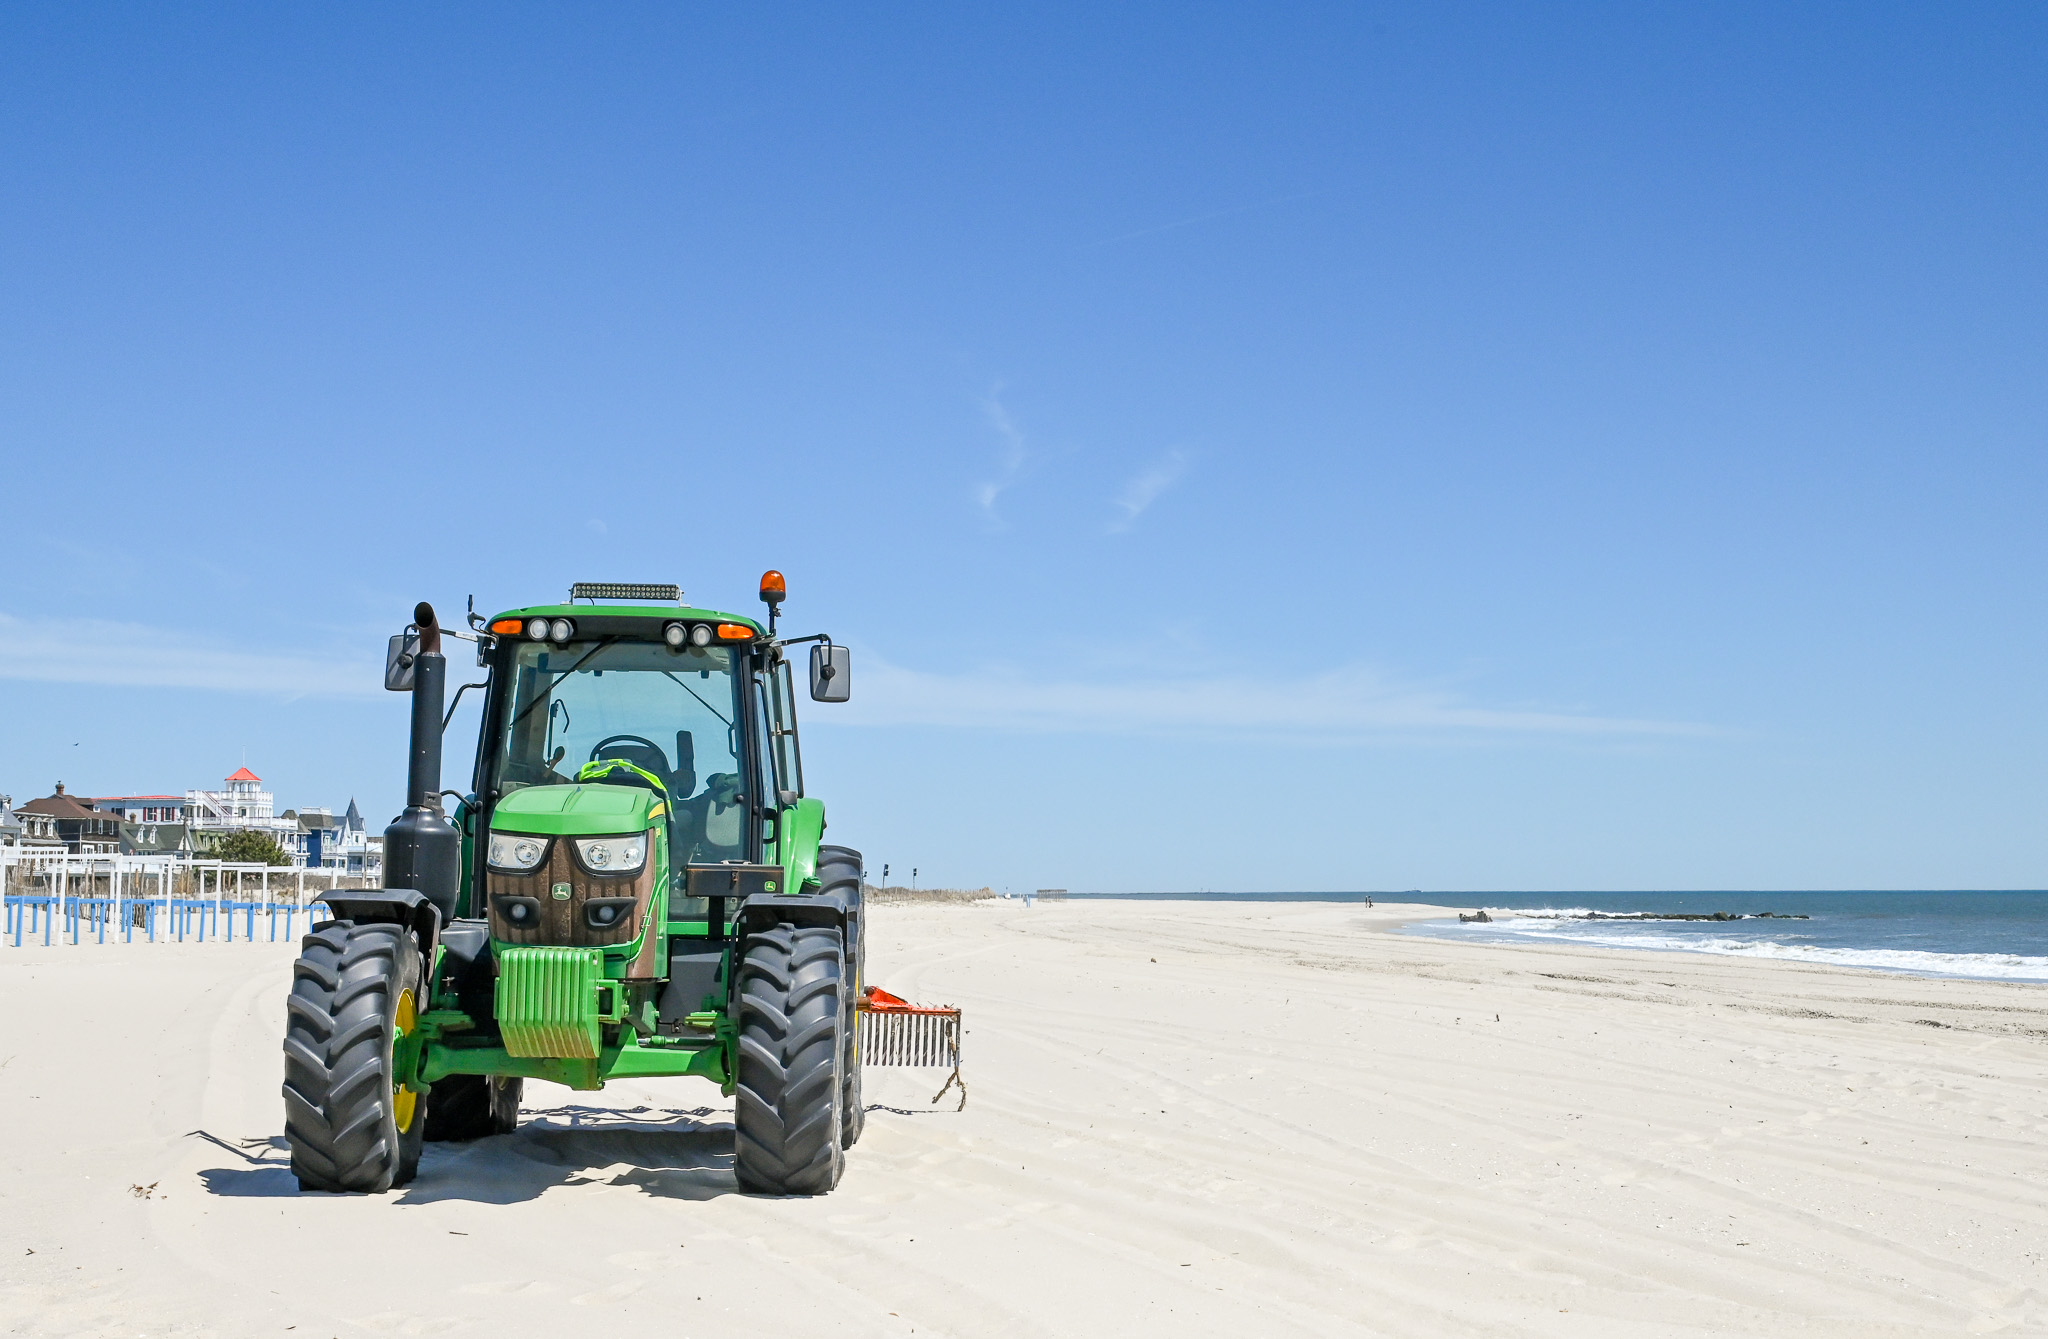 Tractors Are On The Beach by Convention Hall